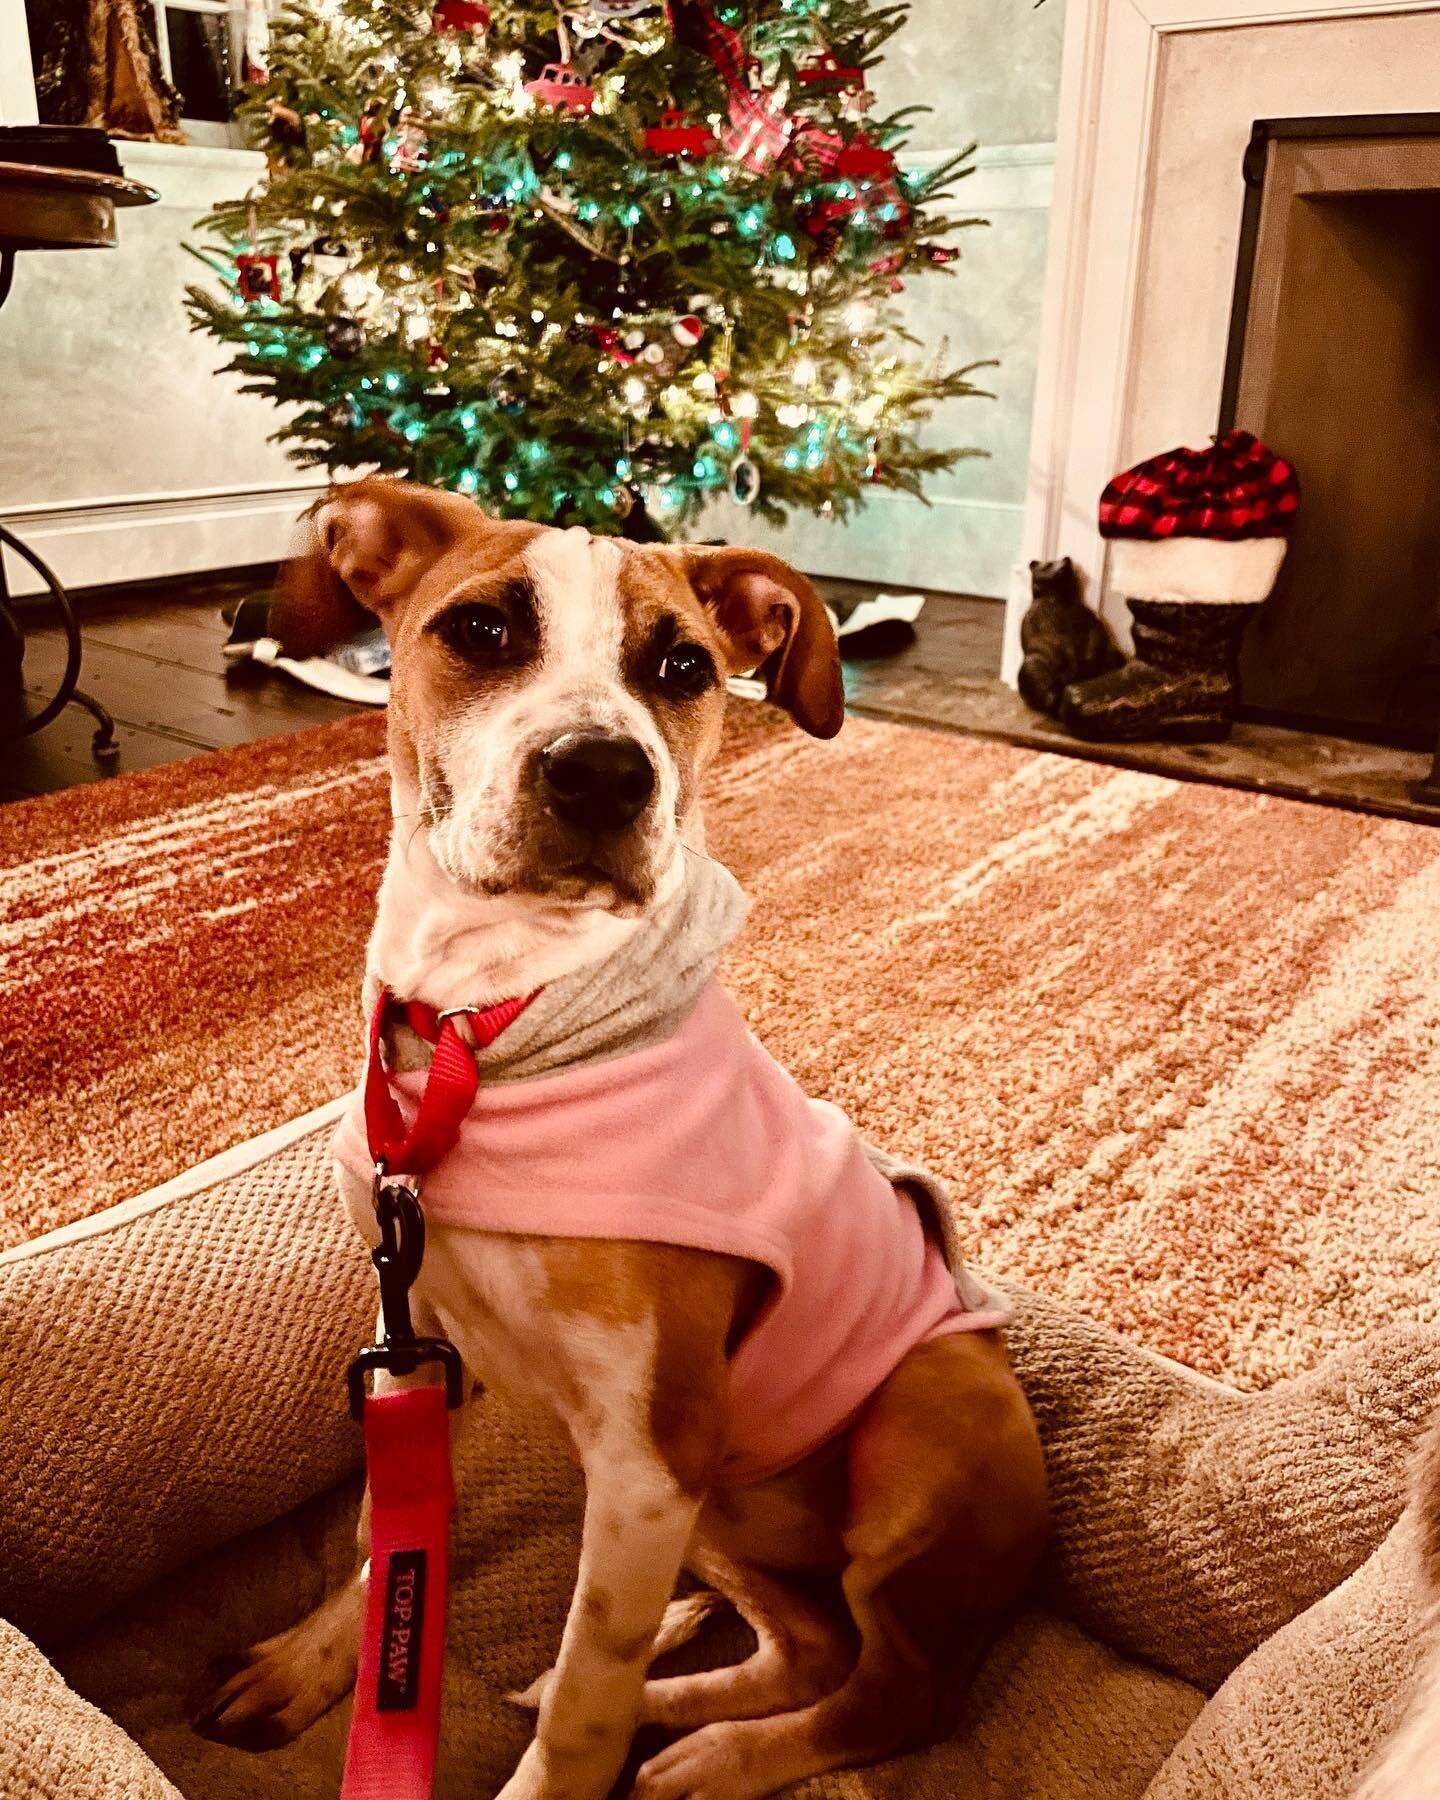 🐾 Short-term &lsquo;foster&rsquo; works well for our traveling household. But we are bummed our time with foster pup, Fern, is so short.

🐾 If interested in having a loyal pup, to call yours, contact Brandywine Valley SPCA @brandywinespca for a mee